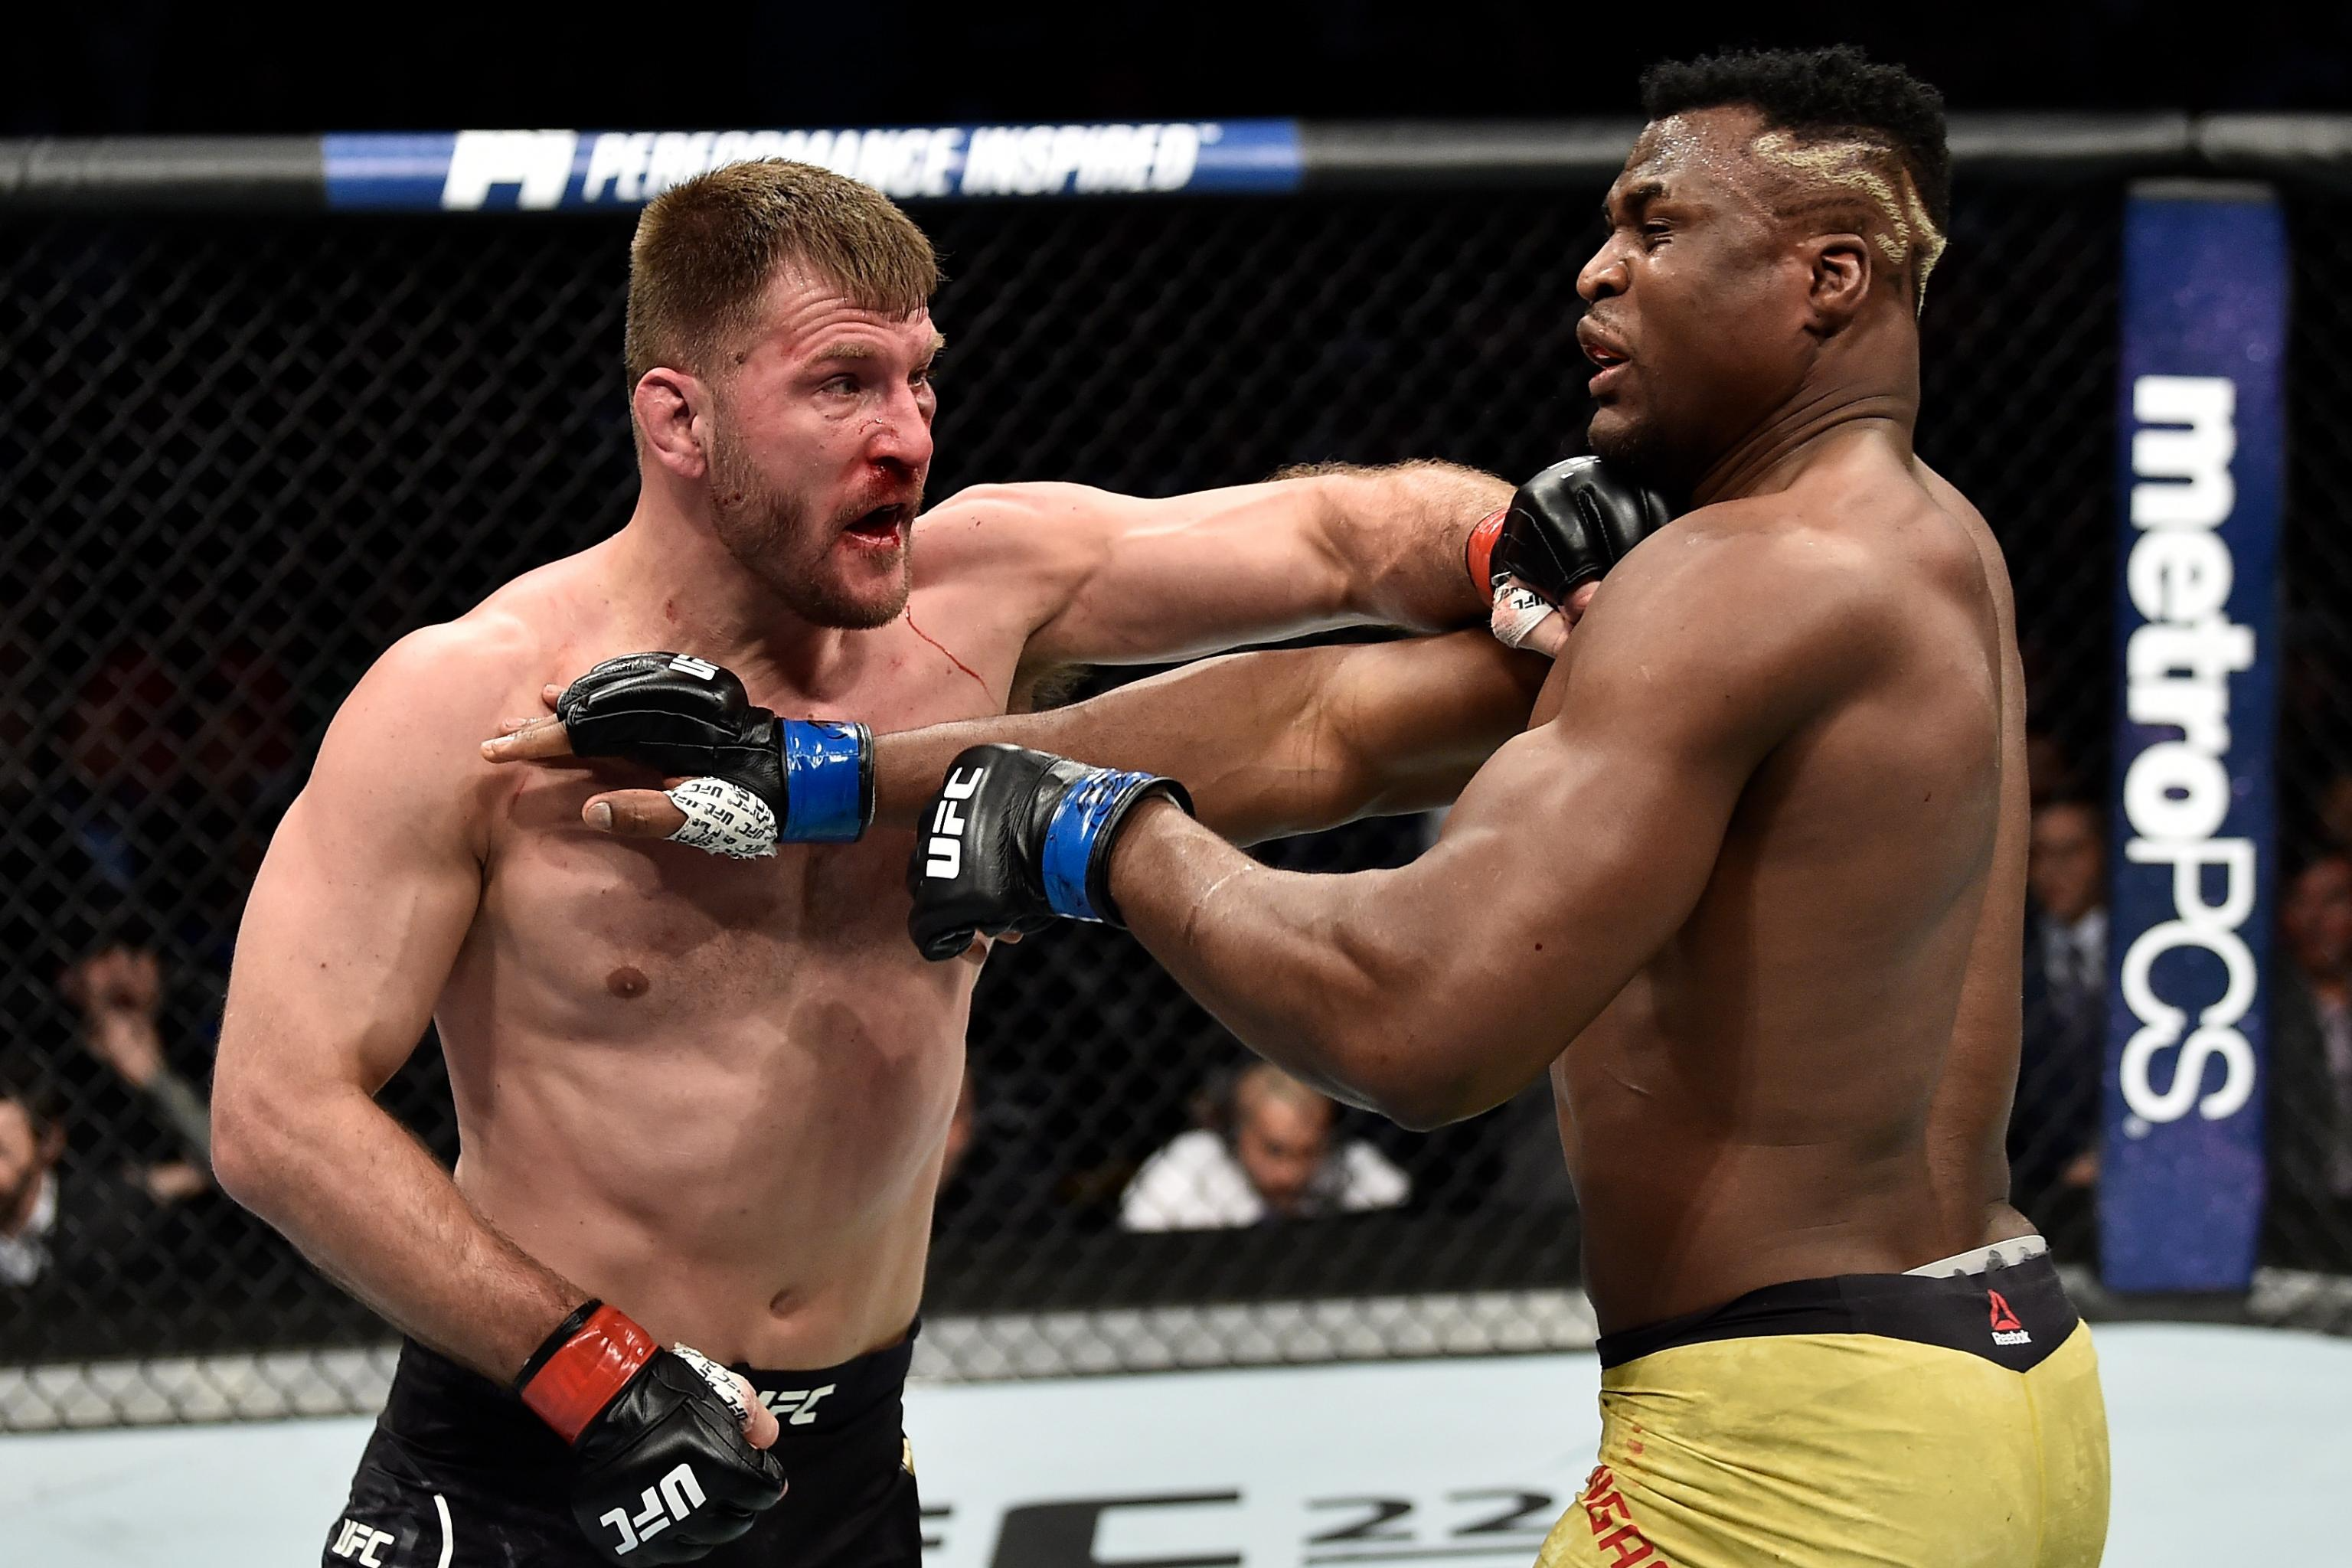 Ngannou Names First Fight With Miocic Best Fight Of His Career So Far